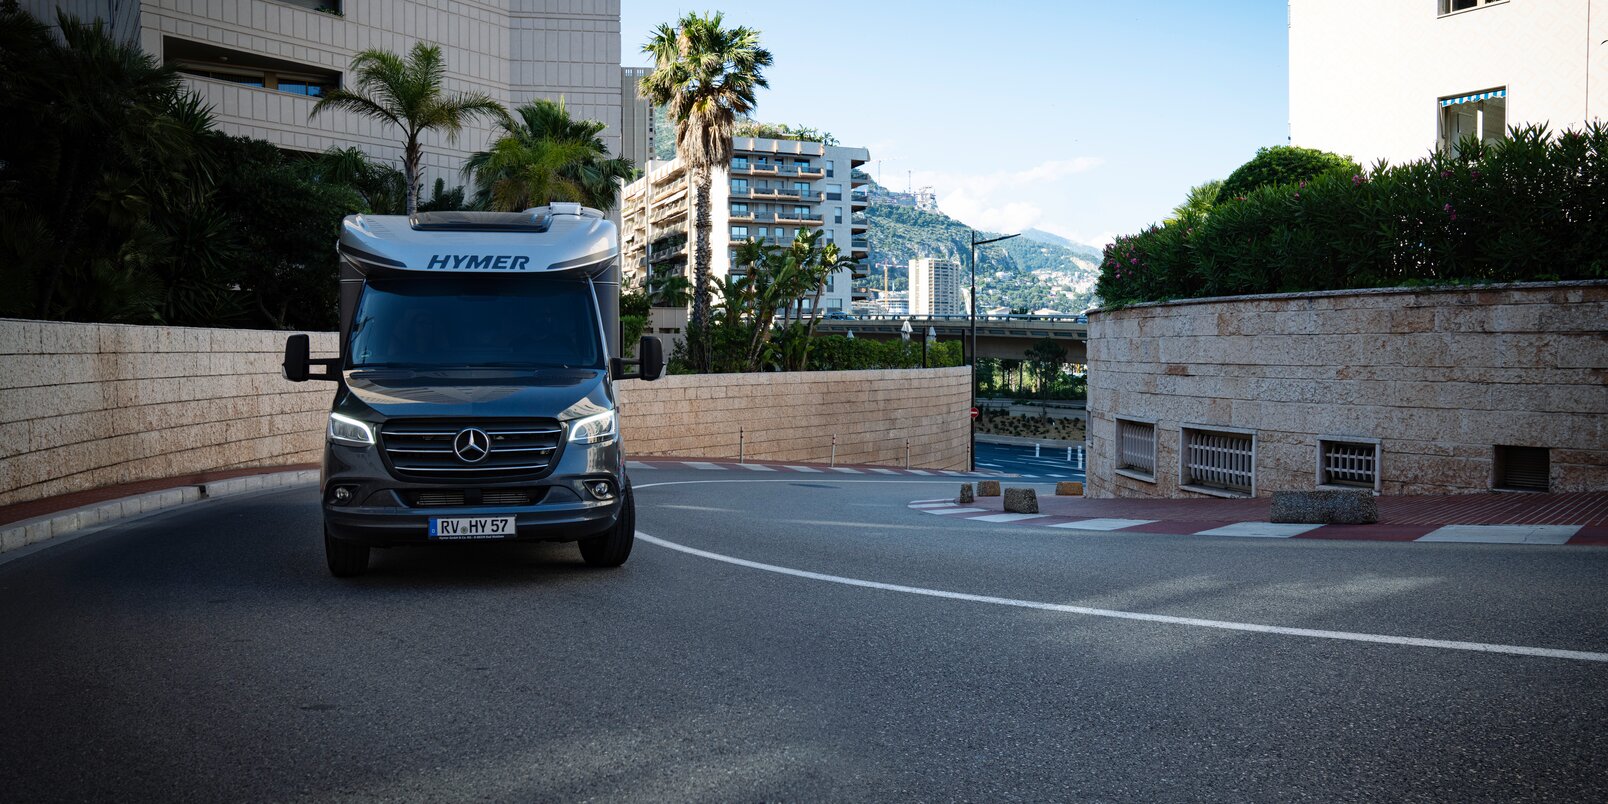 Gorge of houses in a Mediterranean coastal town with a HYMER B-ML T driving uphill in a street curve